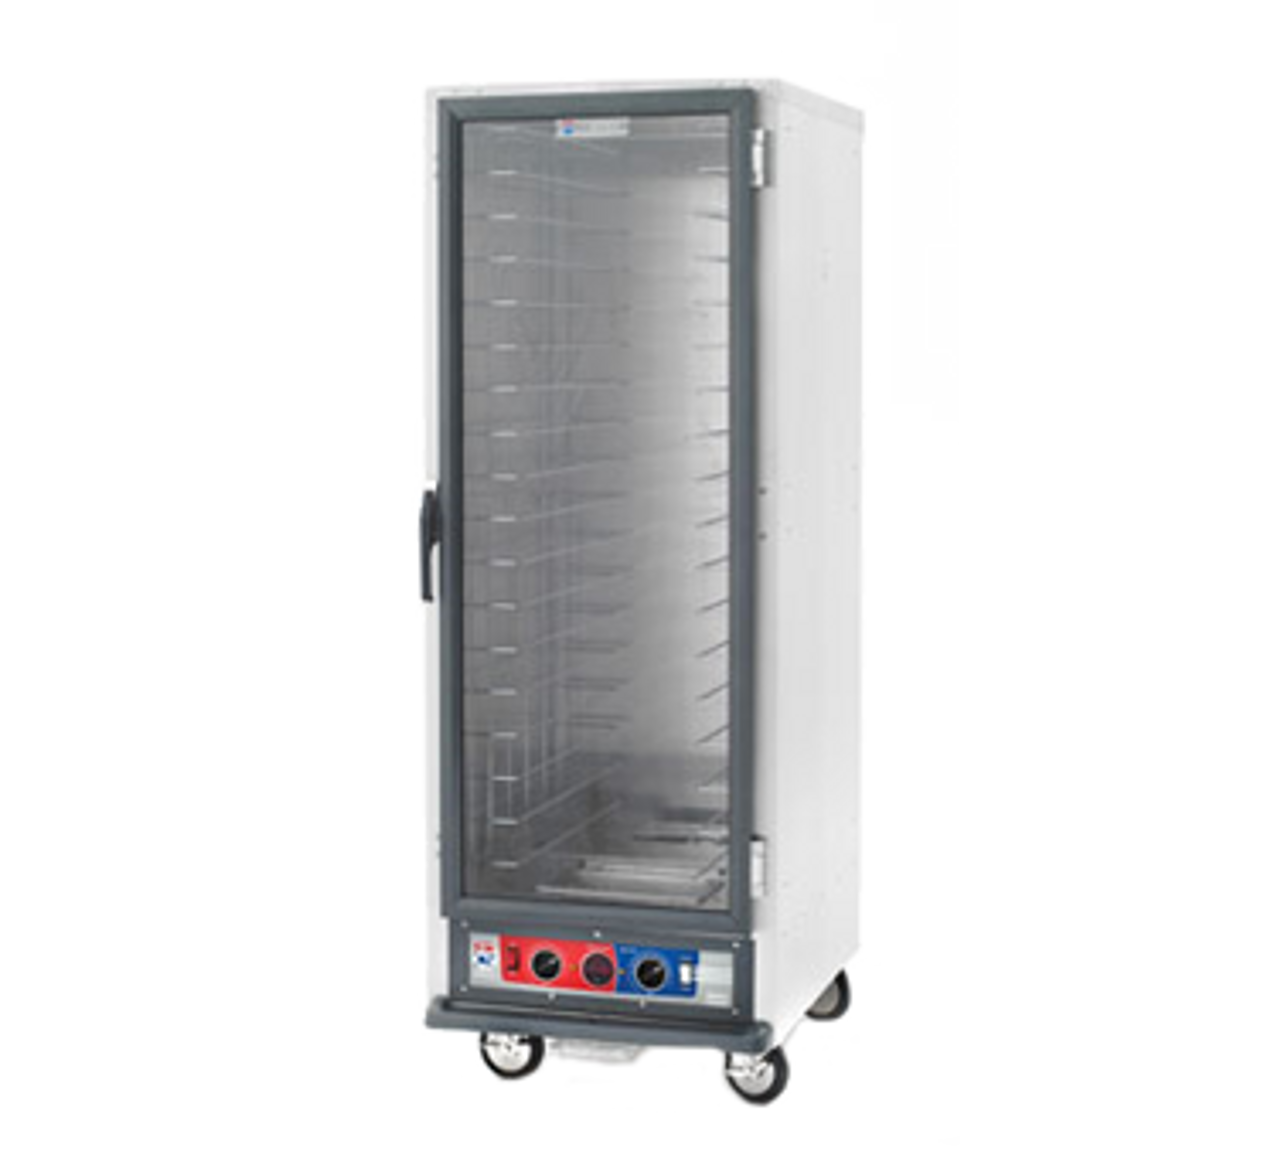 C5™ 1 Series Heated Holding Cabinet, mobile, full height, non-insulated, clear polycarbonate door, removable bottom mount control module, thermostat to 190°F, universal wire slides on 3" centers, adjustable on 1-1/2" increments (18) 18" x 26" or (34) 12" x 20" x 2-1/2" pan capacity, 5" casters (2 with brakes), aluminum, 120v/60/1-ph, 2000 watts, 16 amps, NEMA 5-20P, cULus, NSF